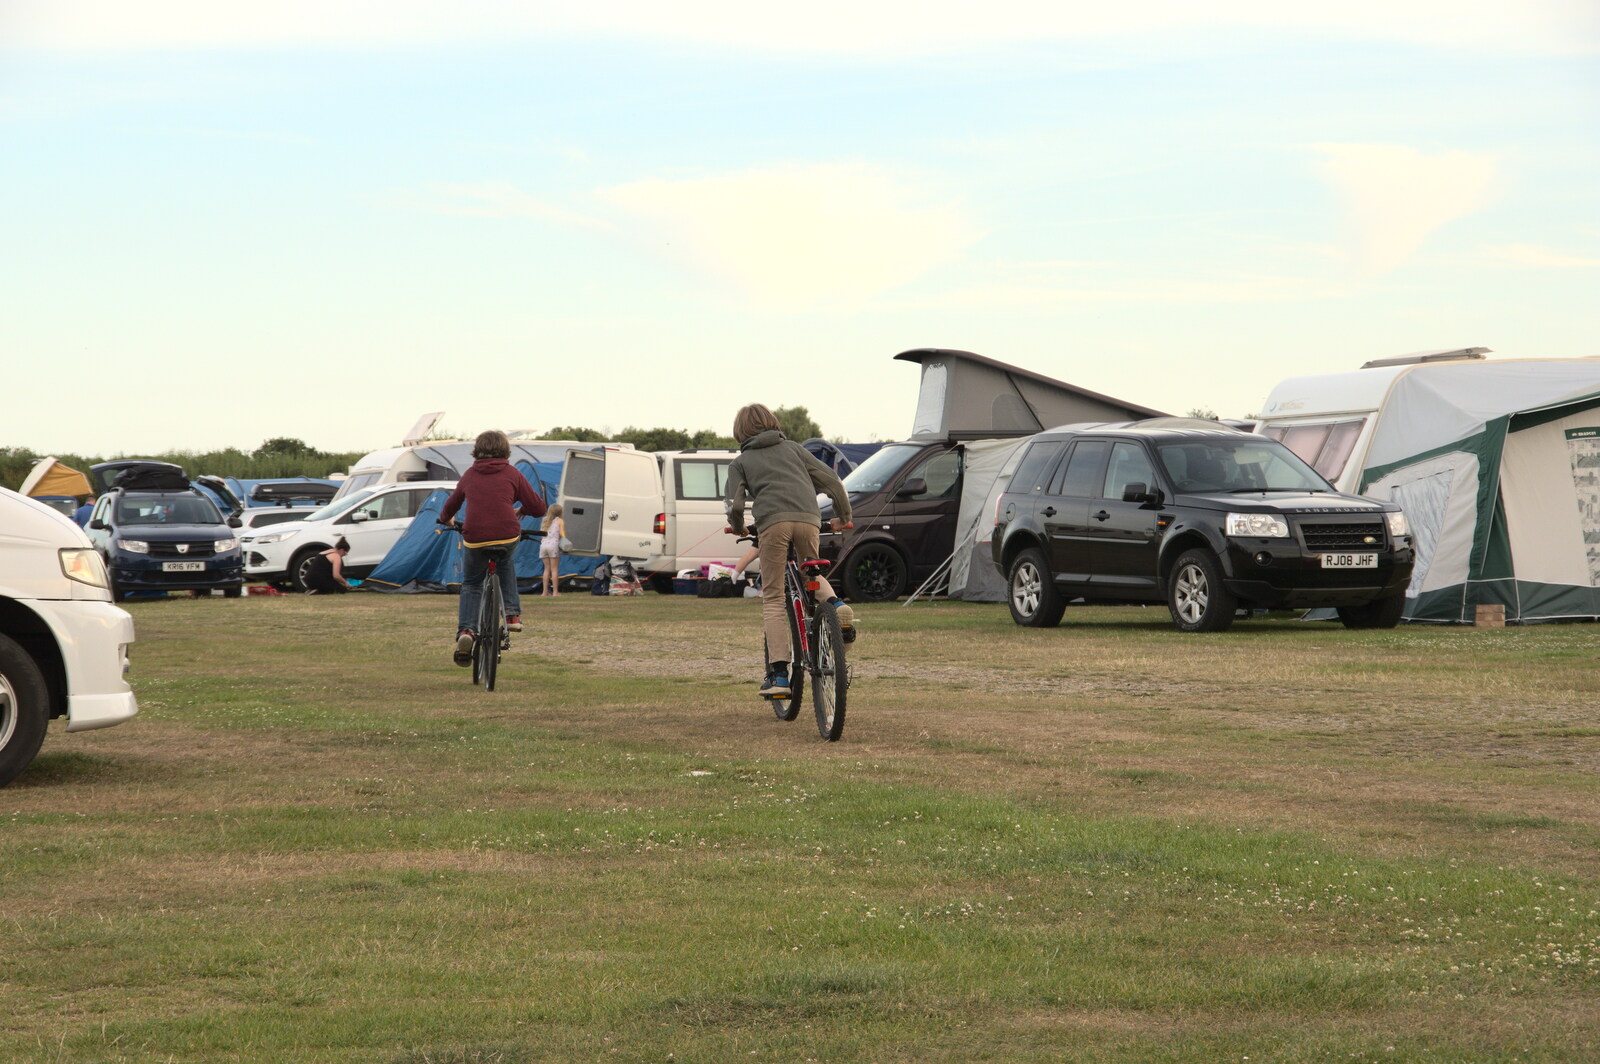 The boys head off on their bikes to the park from Camping in the Dunes, Waxham Sands, Norfolk - 9th July 2022